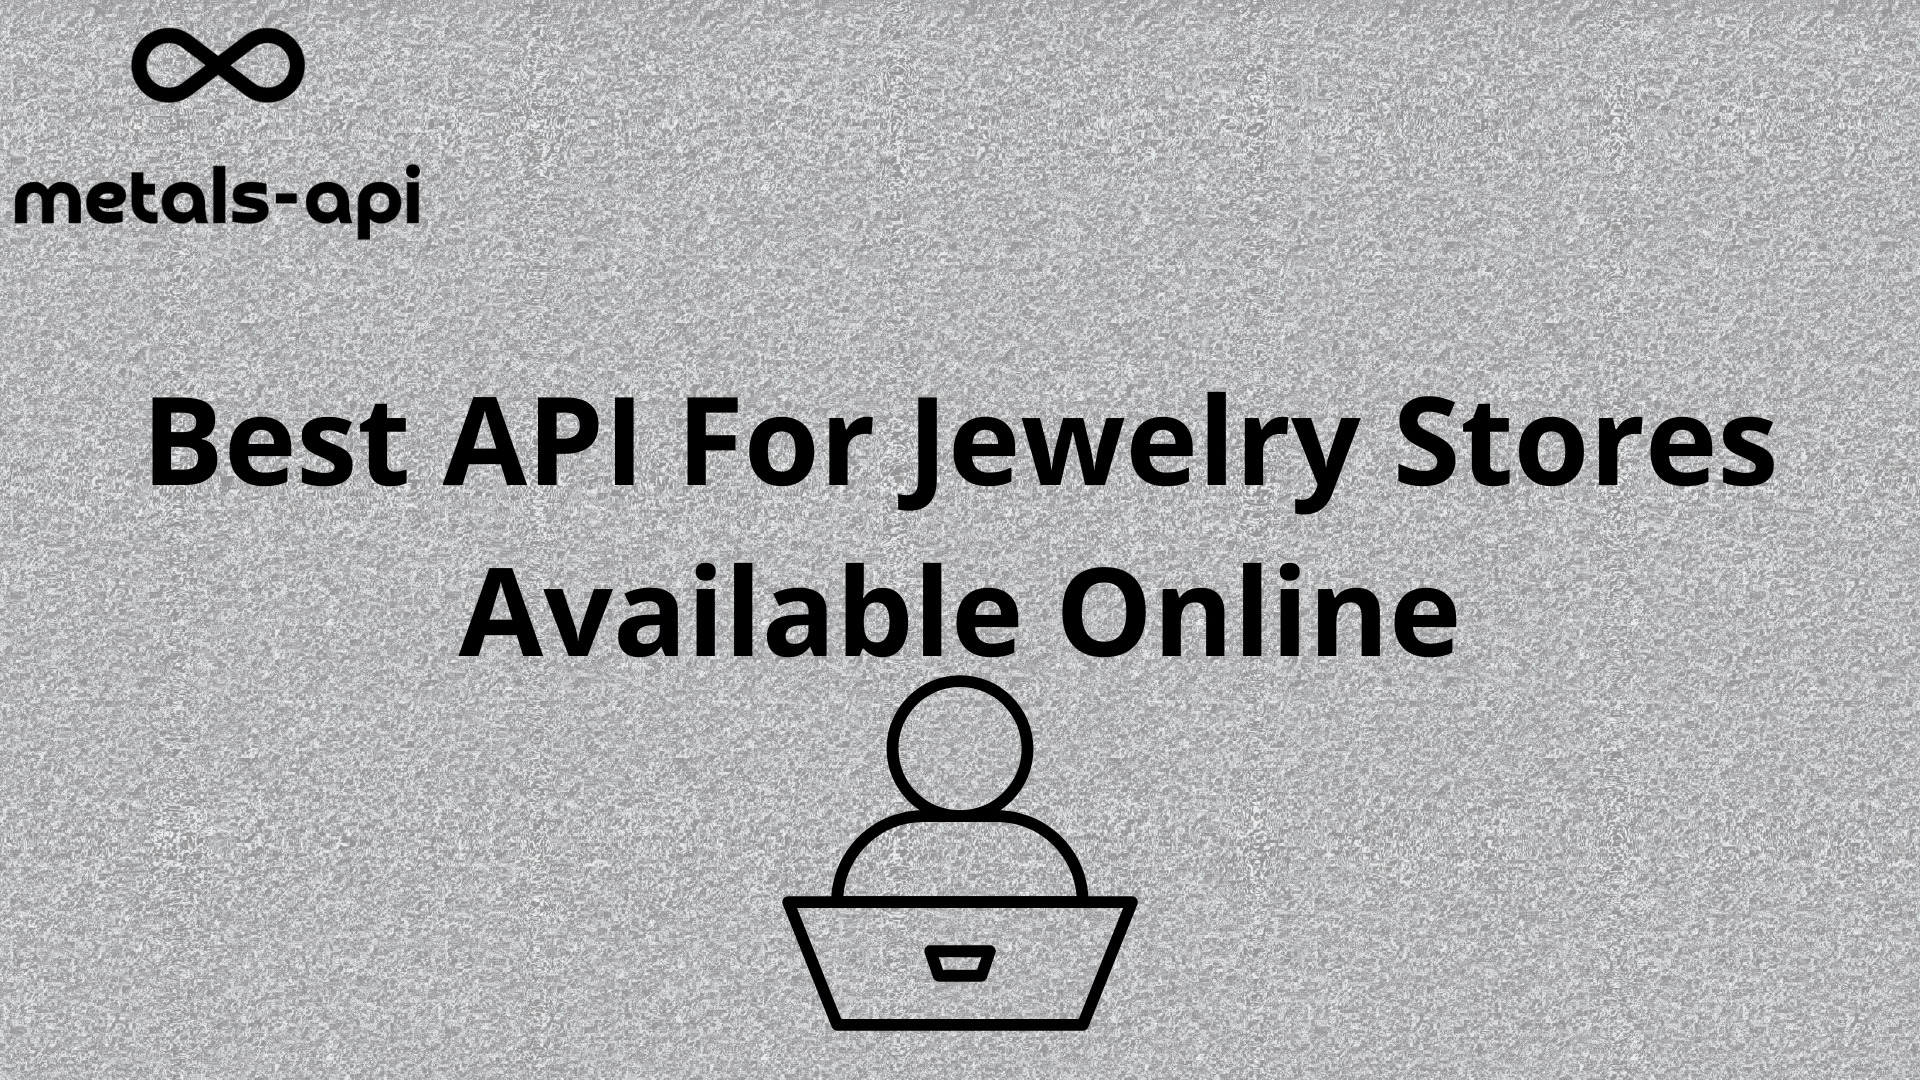 Best API For Jewelers Available Online